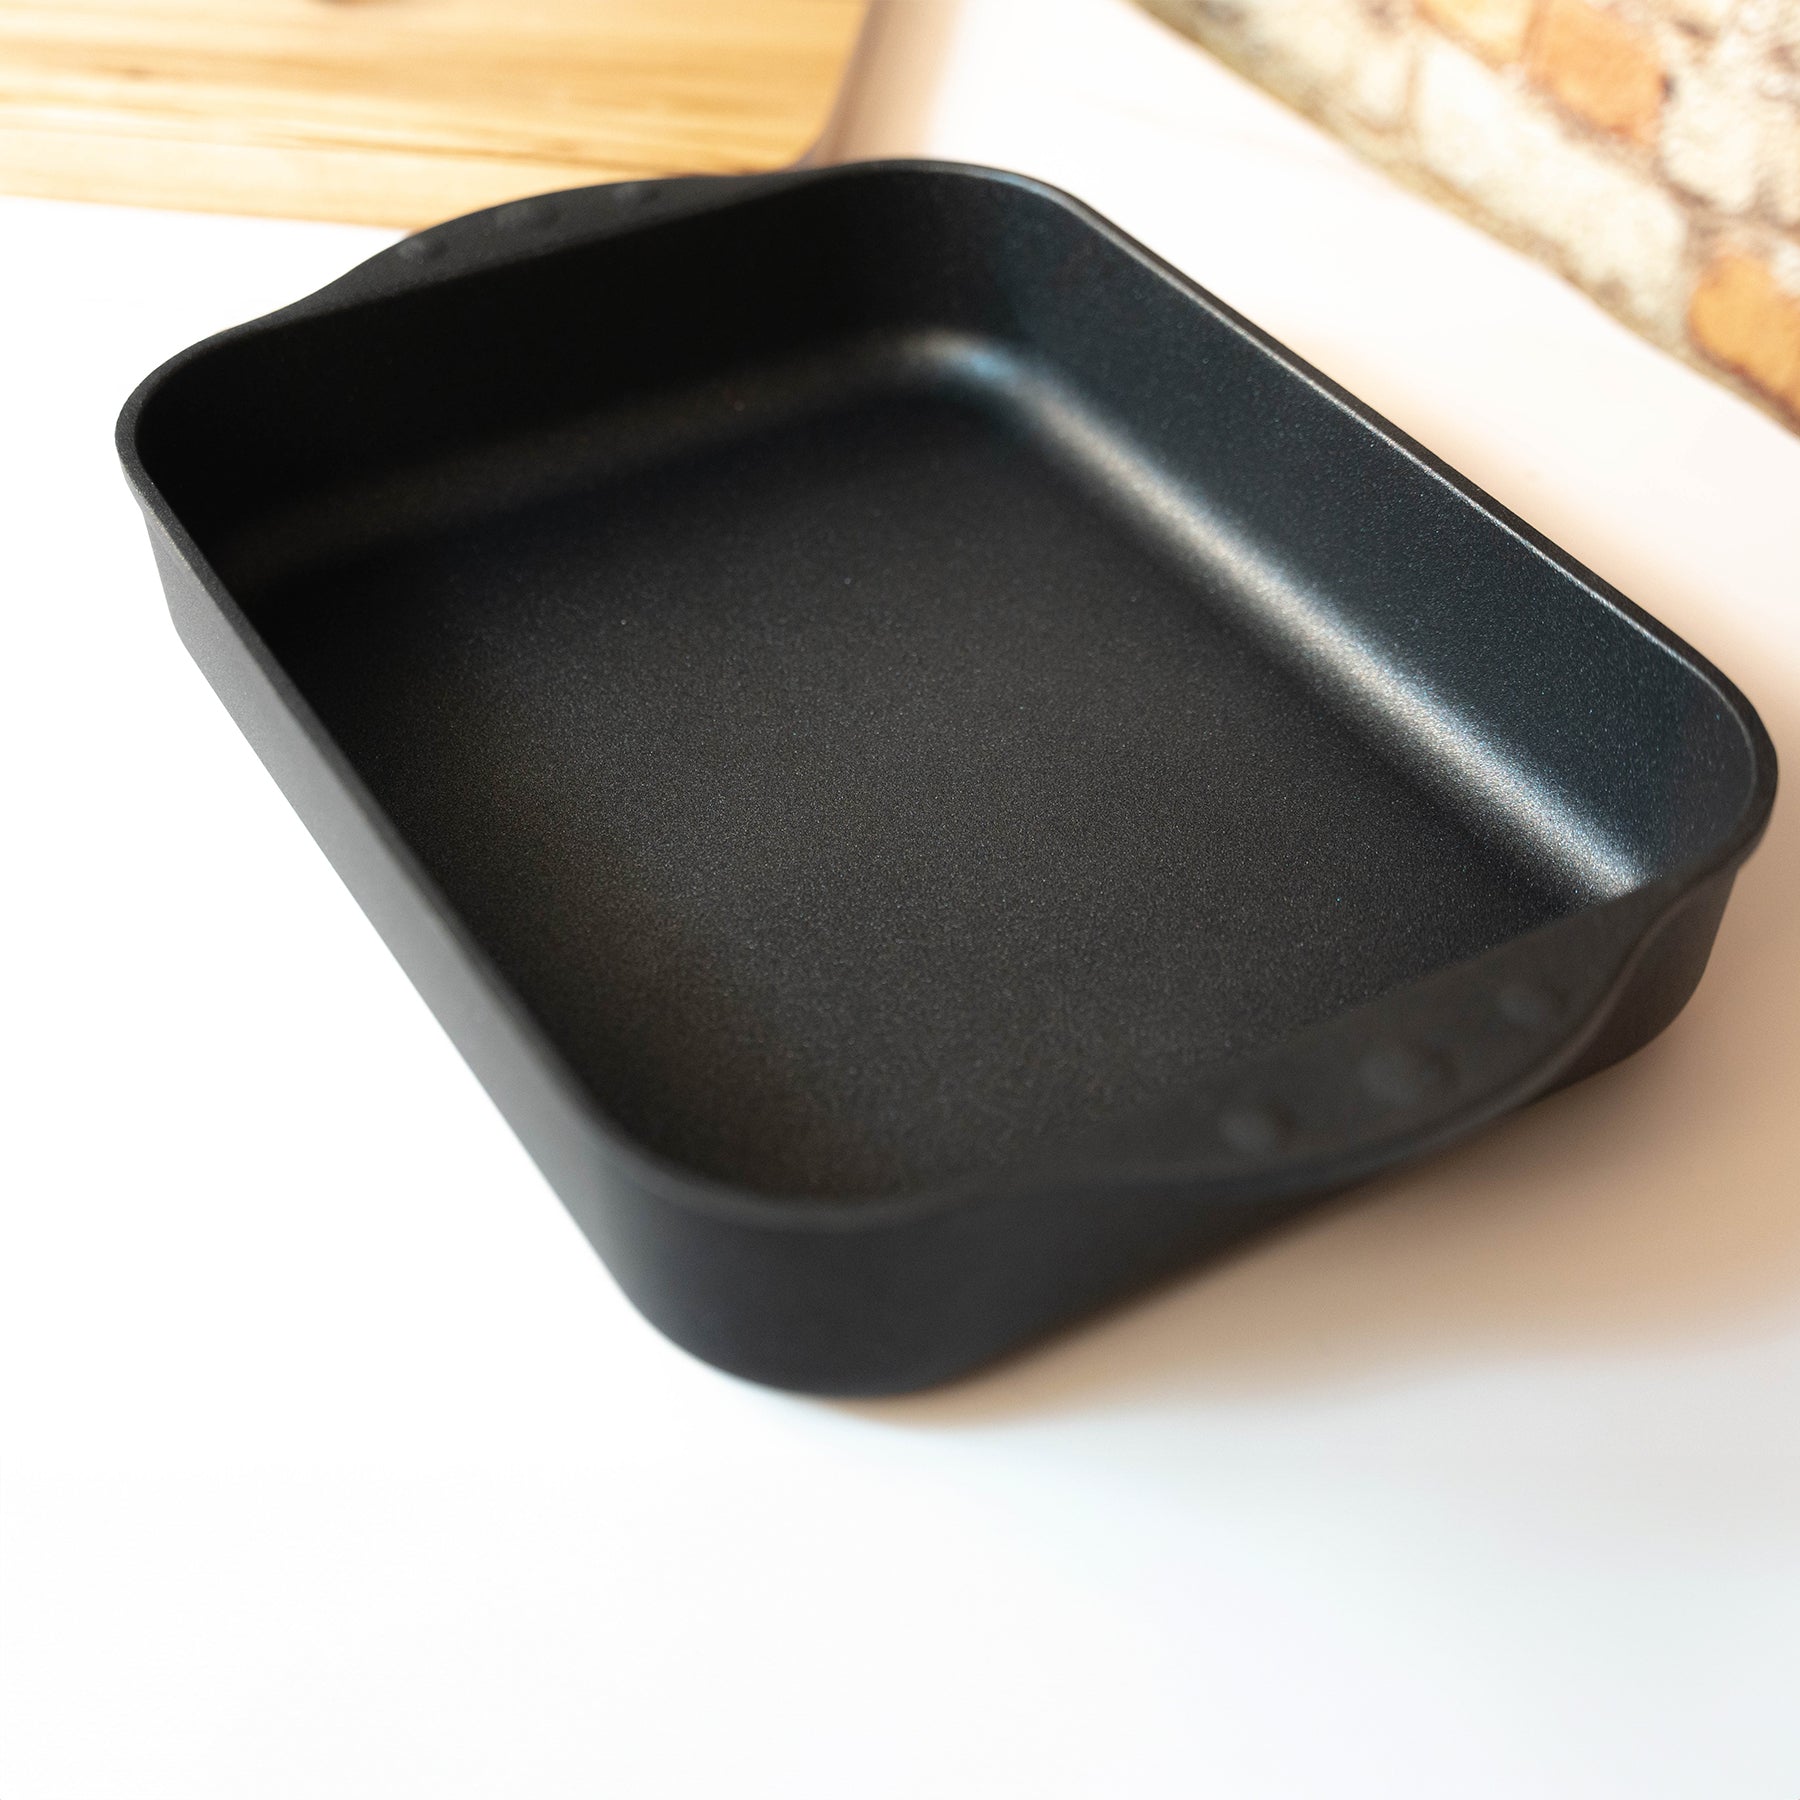 XD Nonstick Roasting Pan in use on kitchen counter